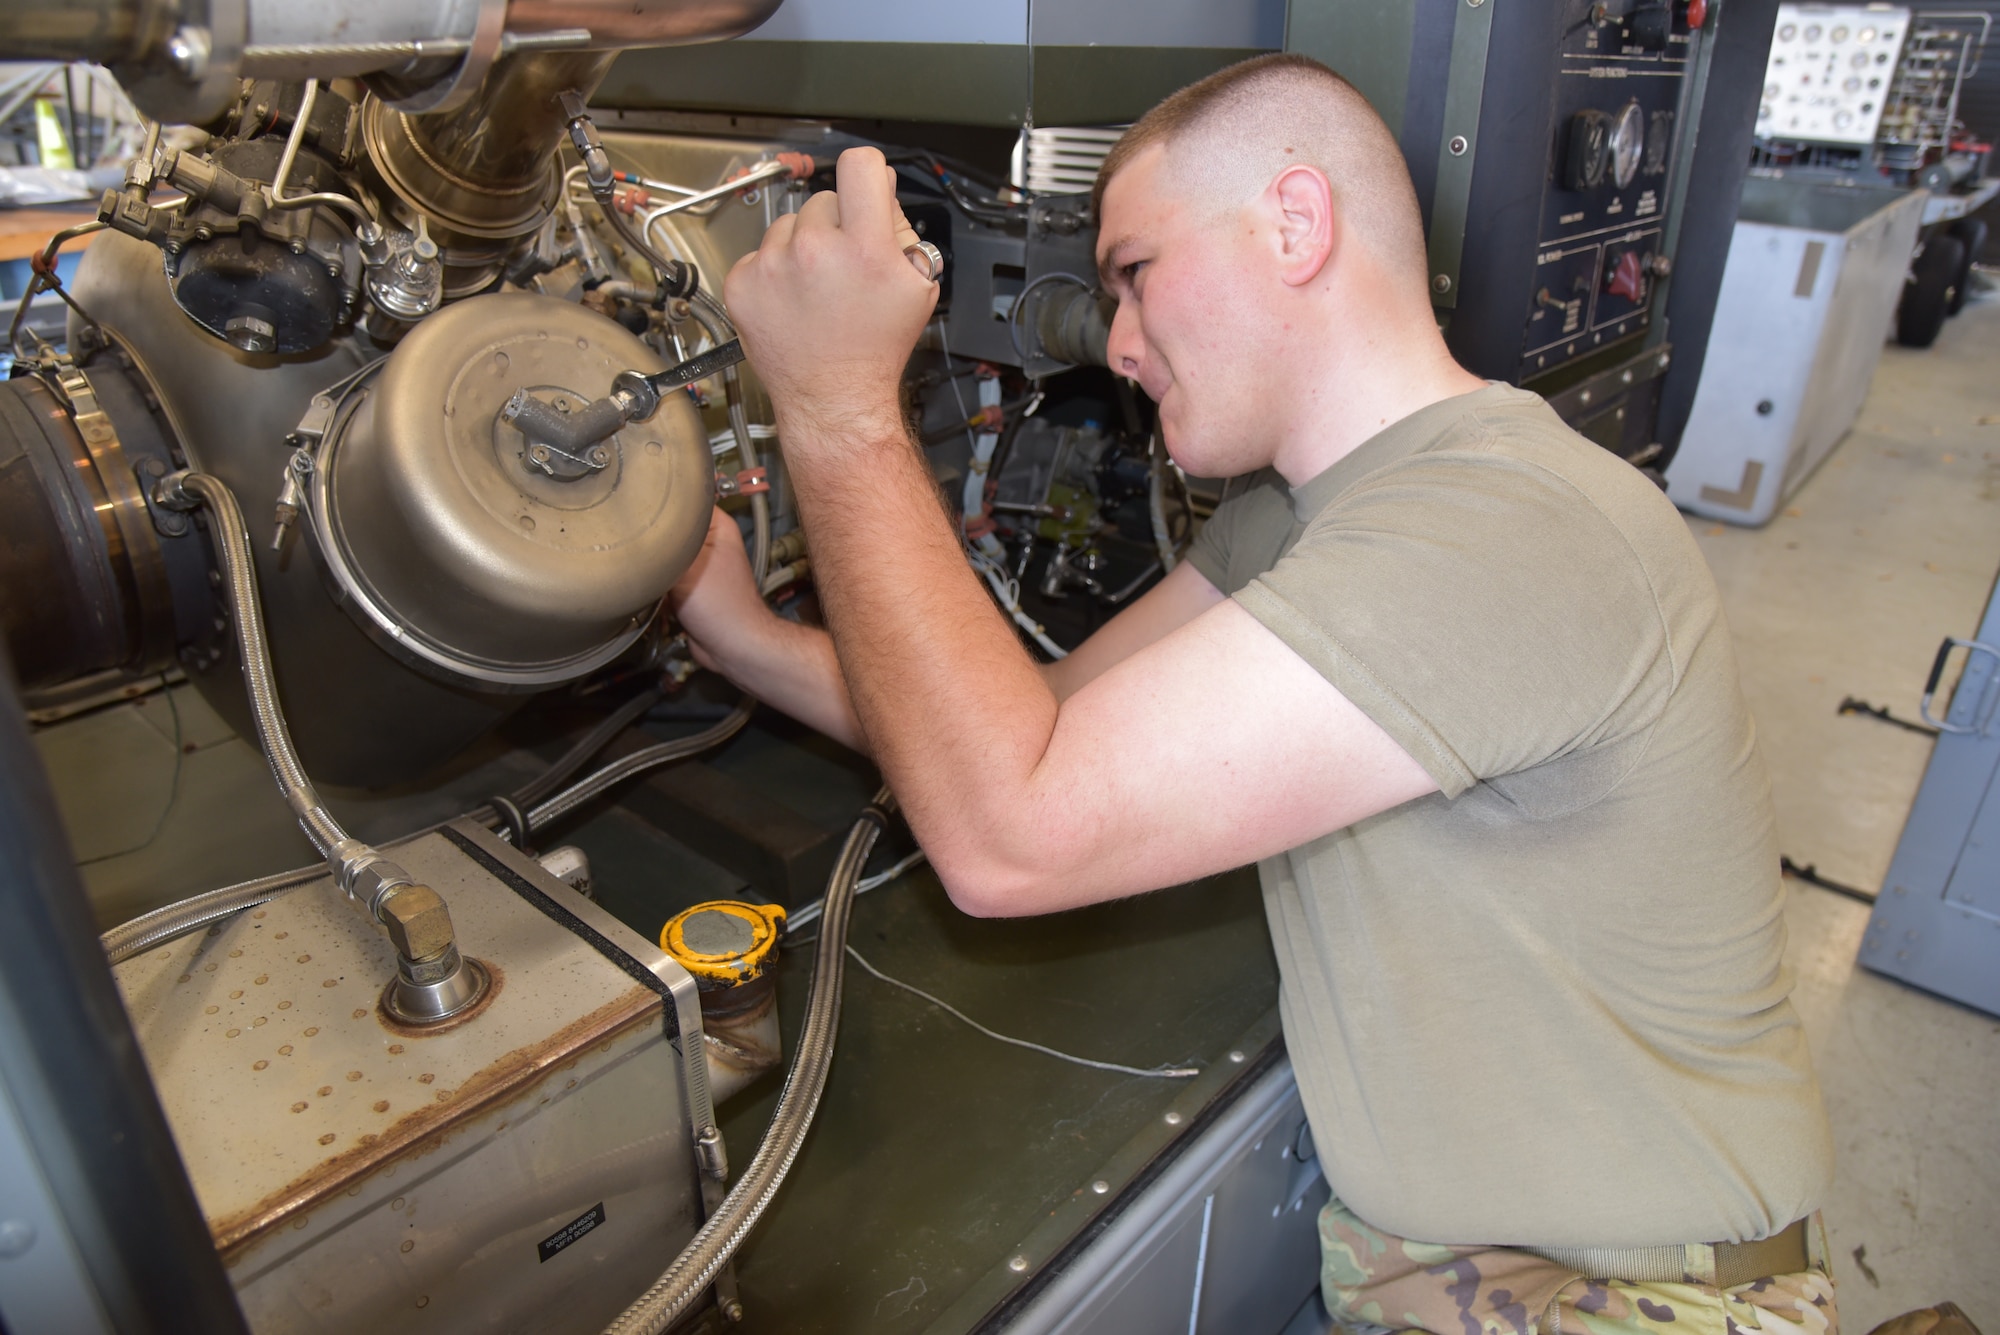 Senior Airman Connor Mason, Aerospace Ground Equipment craftsman assigned to the 403rd Maintenance Squadron, performs maintenance on a A/M32A-95 Turbine Compressor in the Roberts Consolidated Maintenance Facility, March 13, 2021, at Keesler Air Force Base, Mississippi. The AGE shop is responsible for the maintenance and repair of all ground equipment assigned to the 403rd Wing. (U.S. Air Force Photo by Tech Sgt. Michael Farrar)